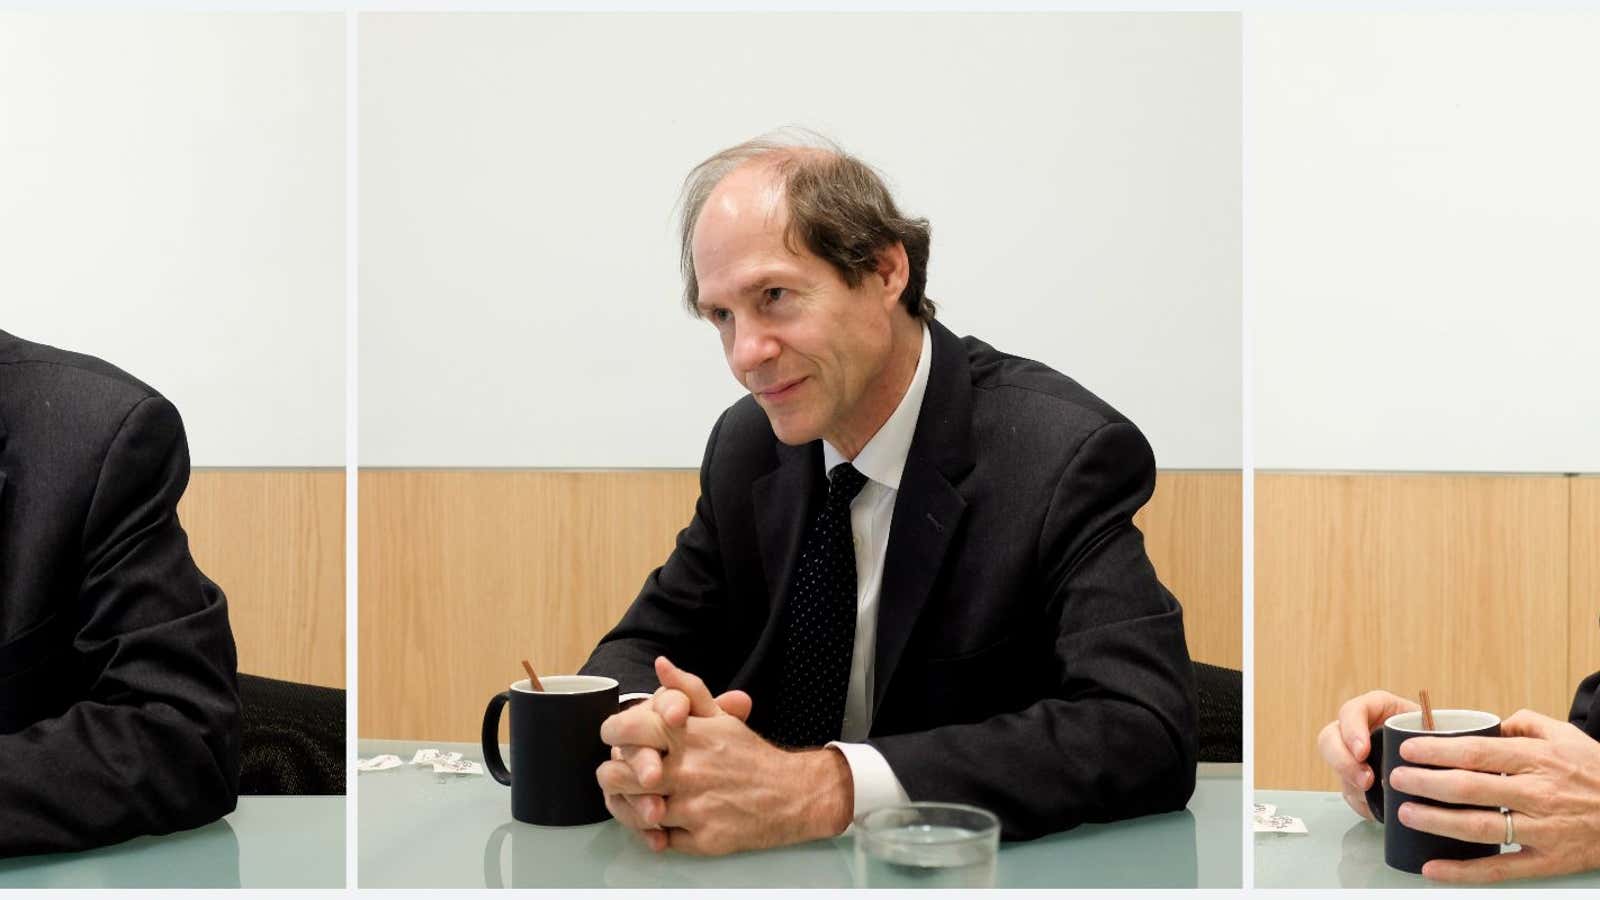 Sunstein’s default is Splenda in his coffee. But Quartz only had sugar. So did he have a choice?